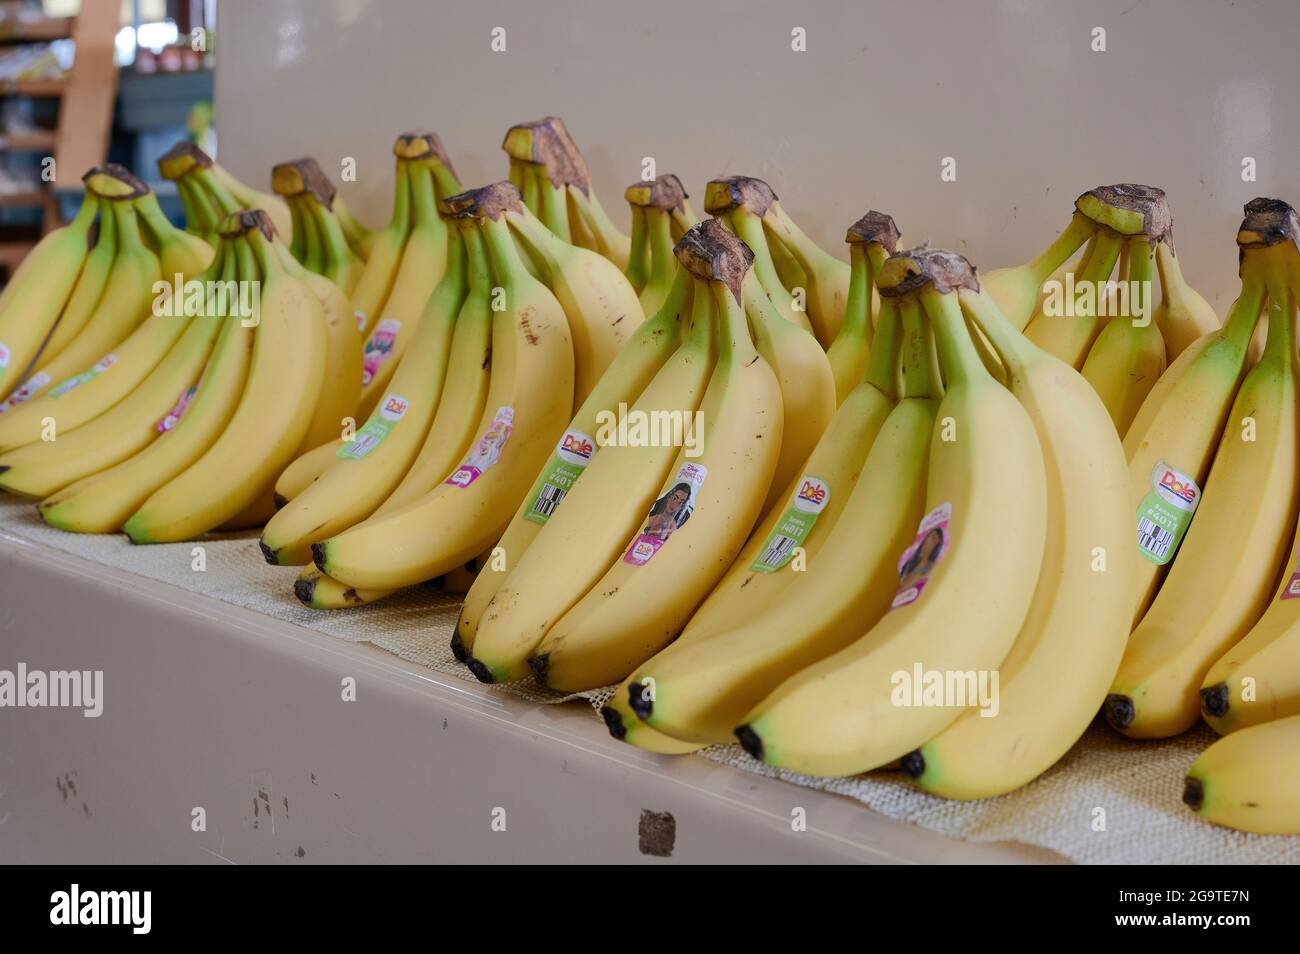 Fresh bunches of bananas at a produce market or farm or farmers market in Montgomery Alabama, USA. Stock Photo